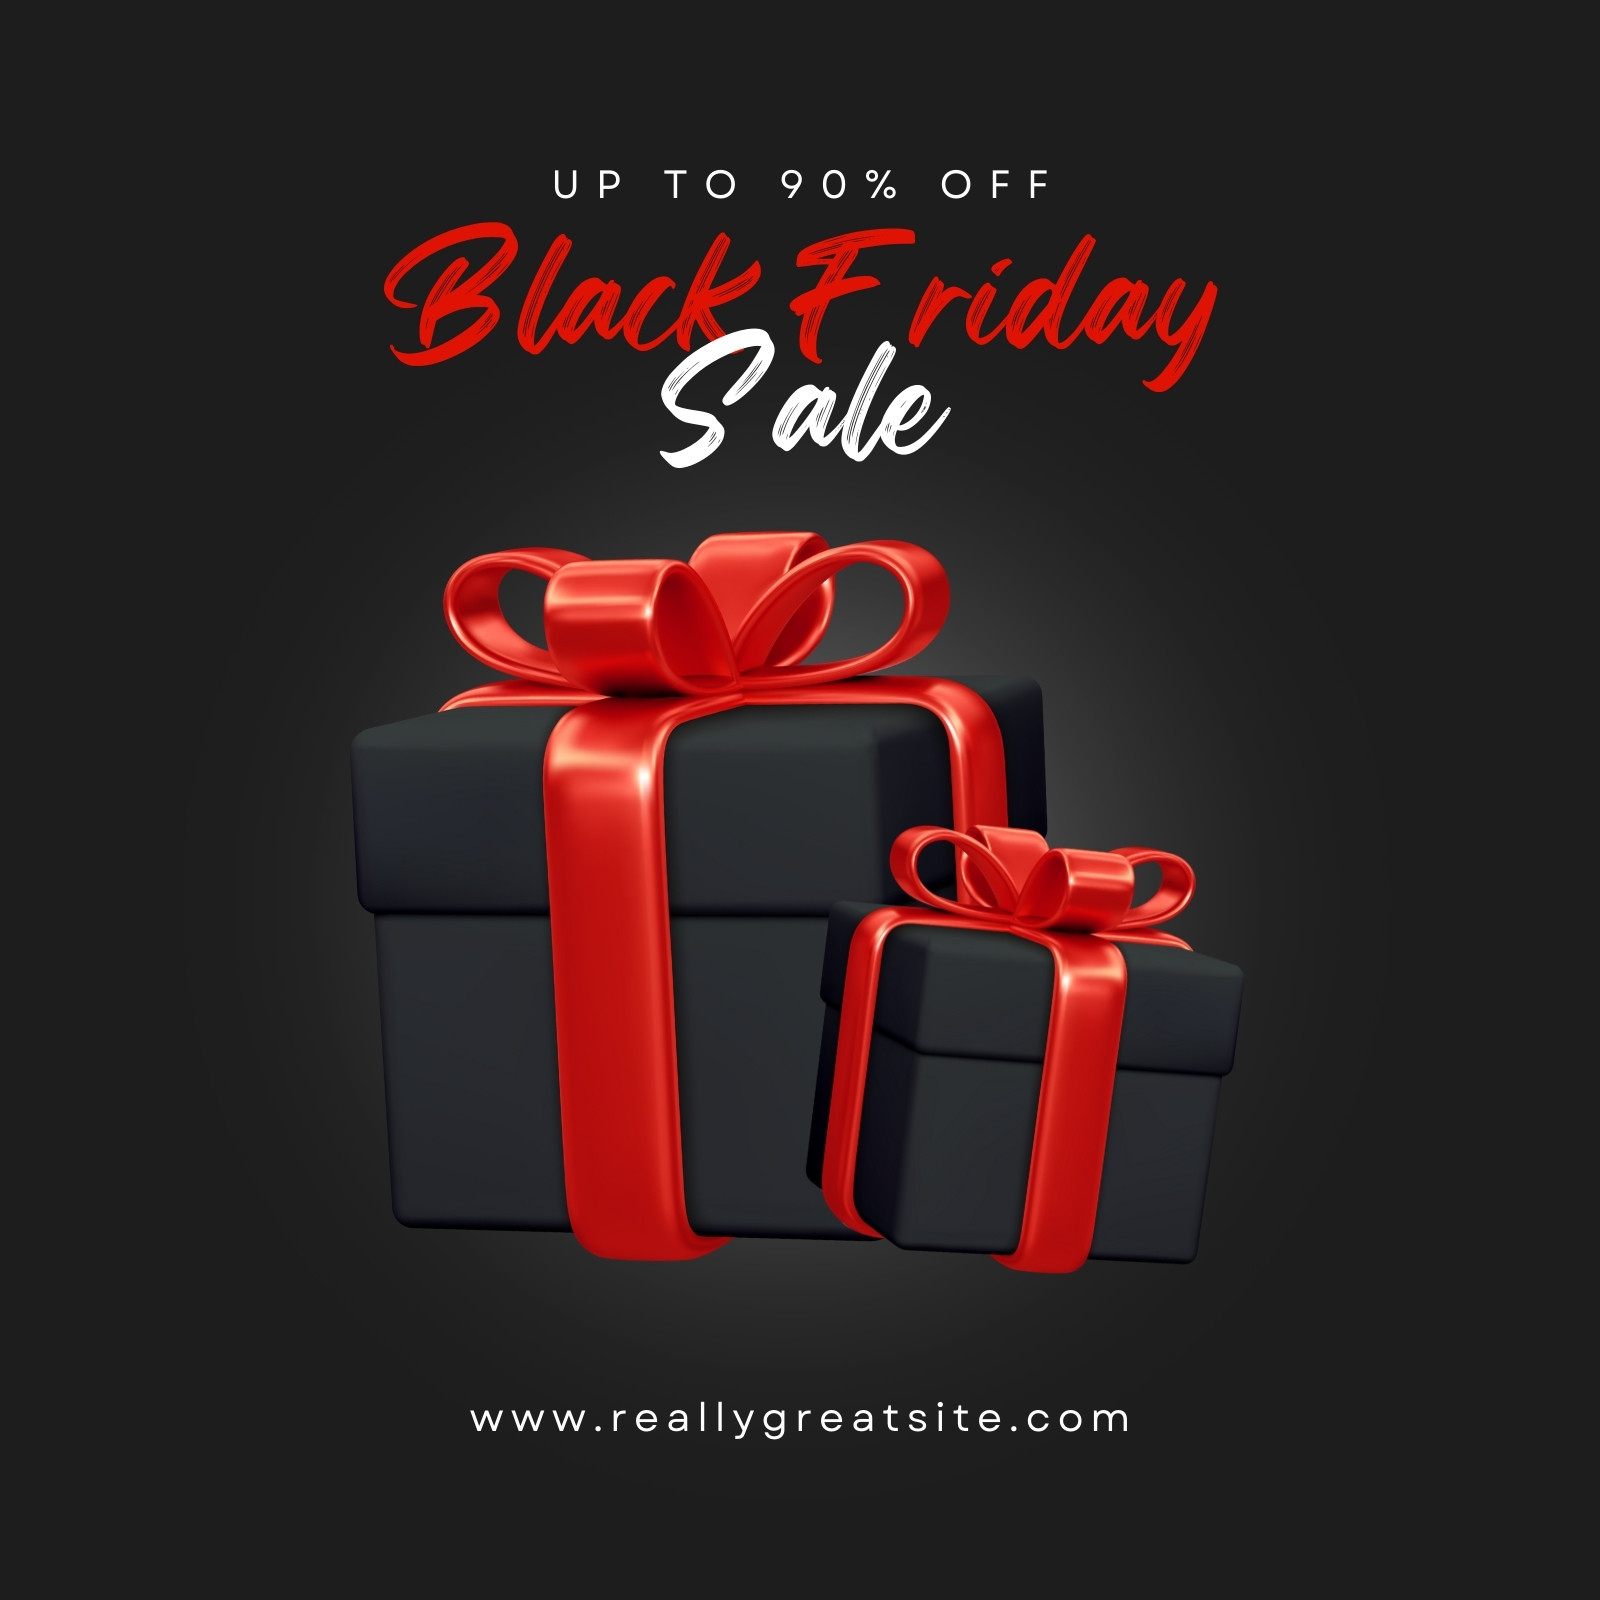 Friday Sale PNG Picture, Box Gift Black Friday Sale, Box Gift, Blackfriday,  12 12 Sale PNG Image For Free Download